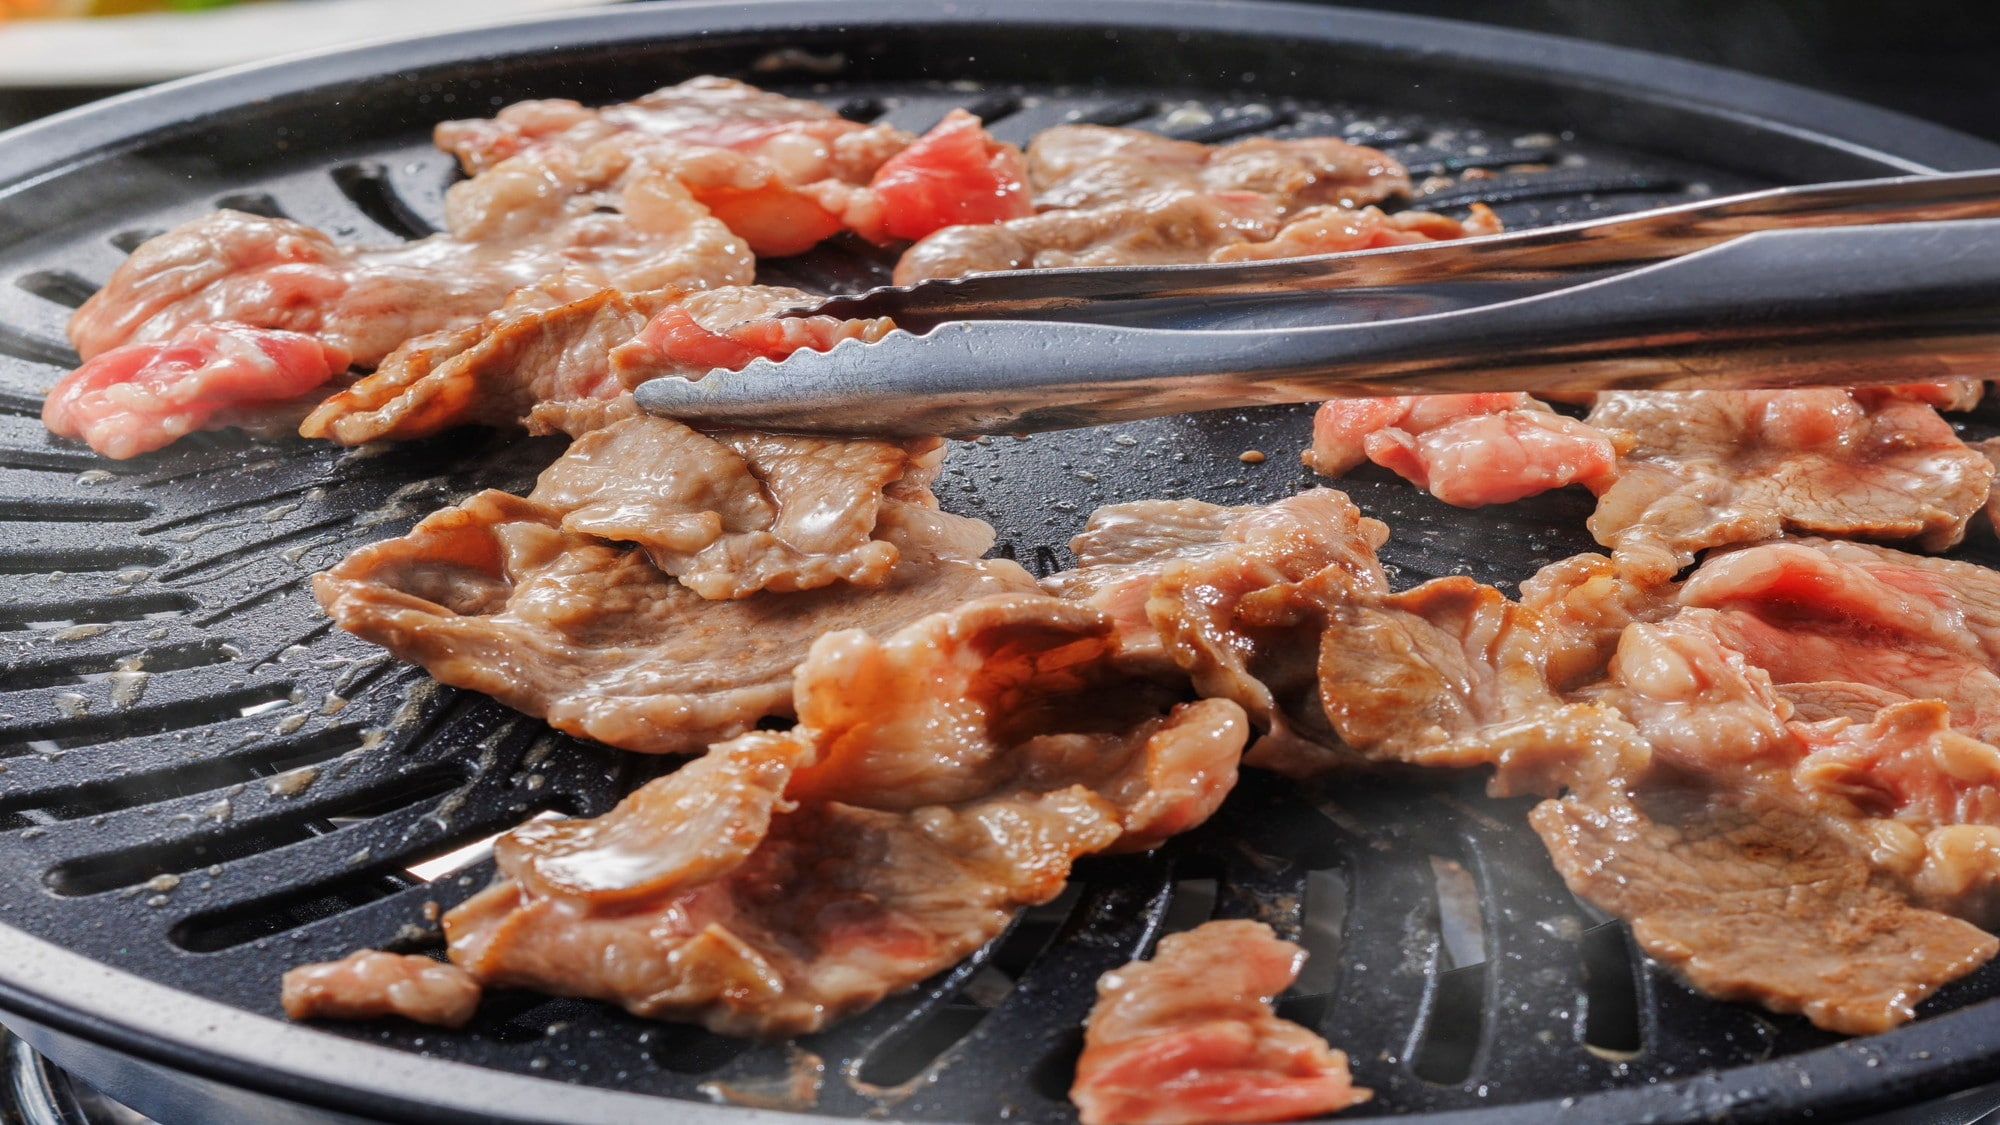 [Zao specialty Genghis Khan set] Enjoy juicy raw lamb grilled to your liking in an iron pot.